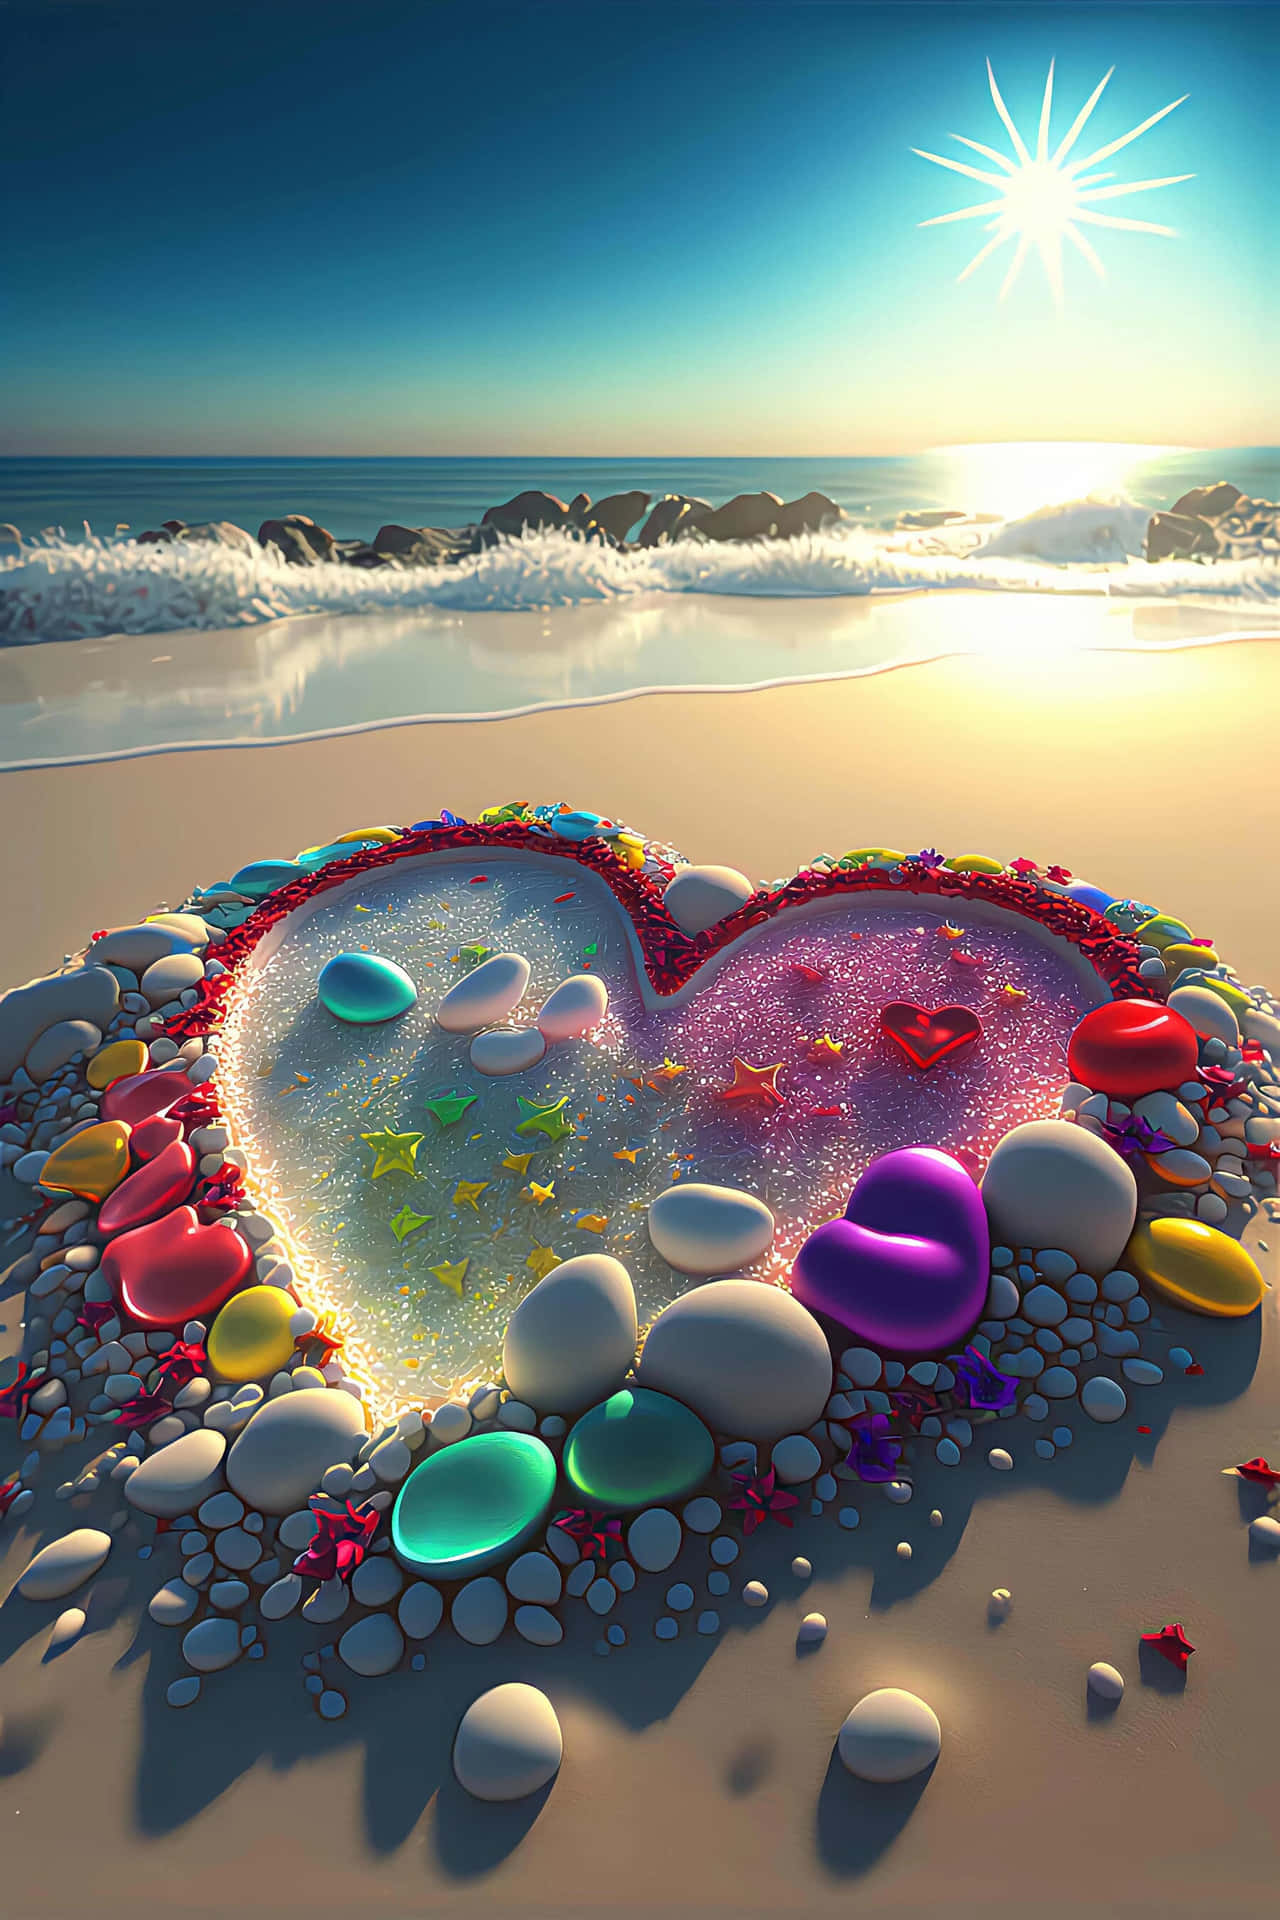 Romantic Beach Sunset with Heart in the Sand Wallpaper